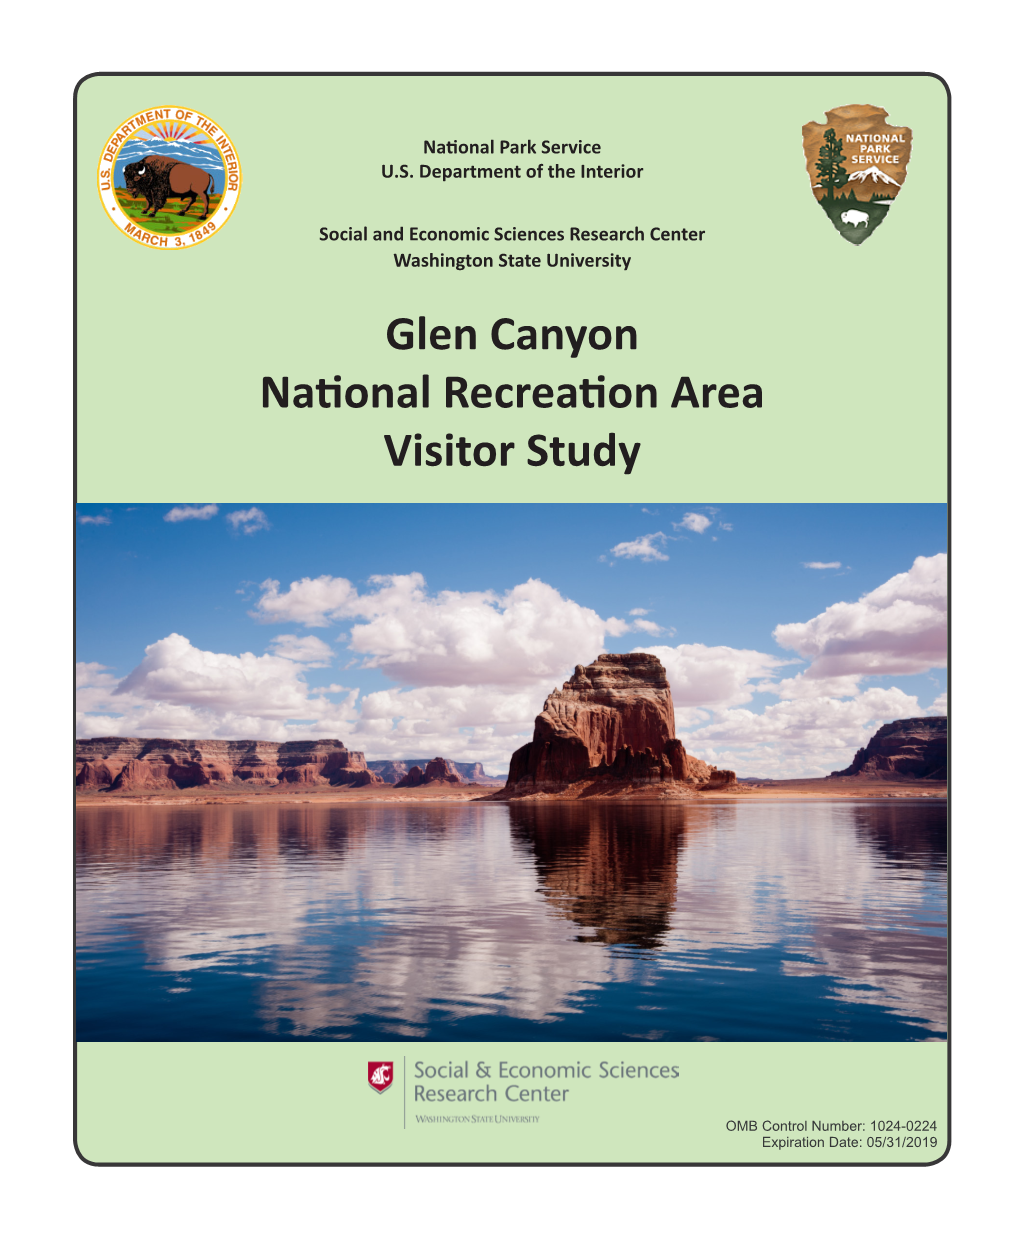 Glen Canyon National Recreation Area Visitor Study